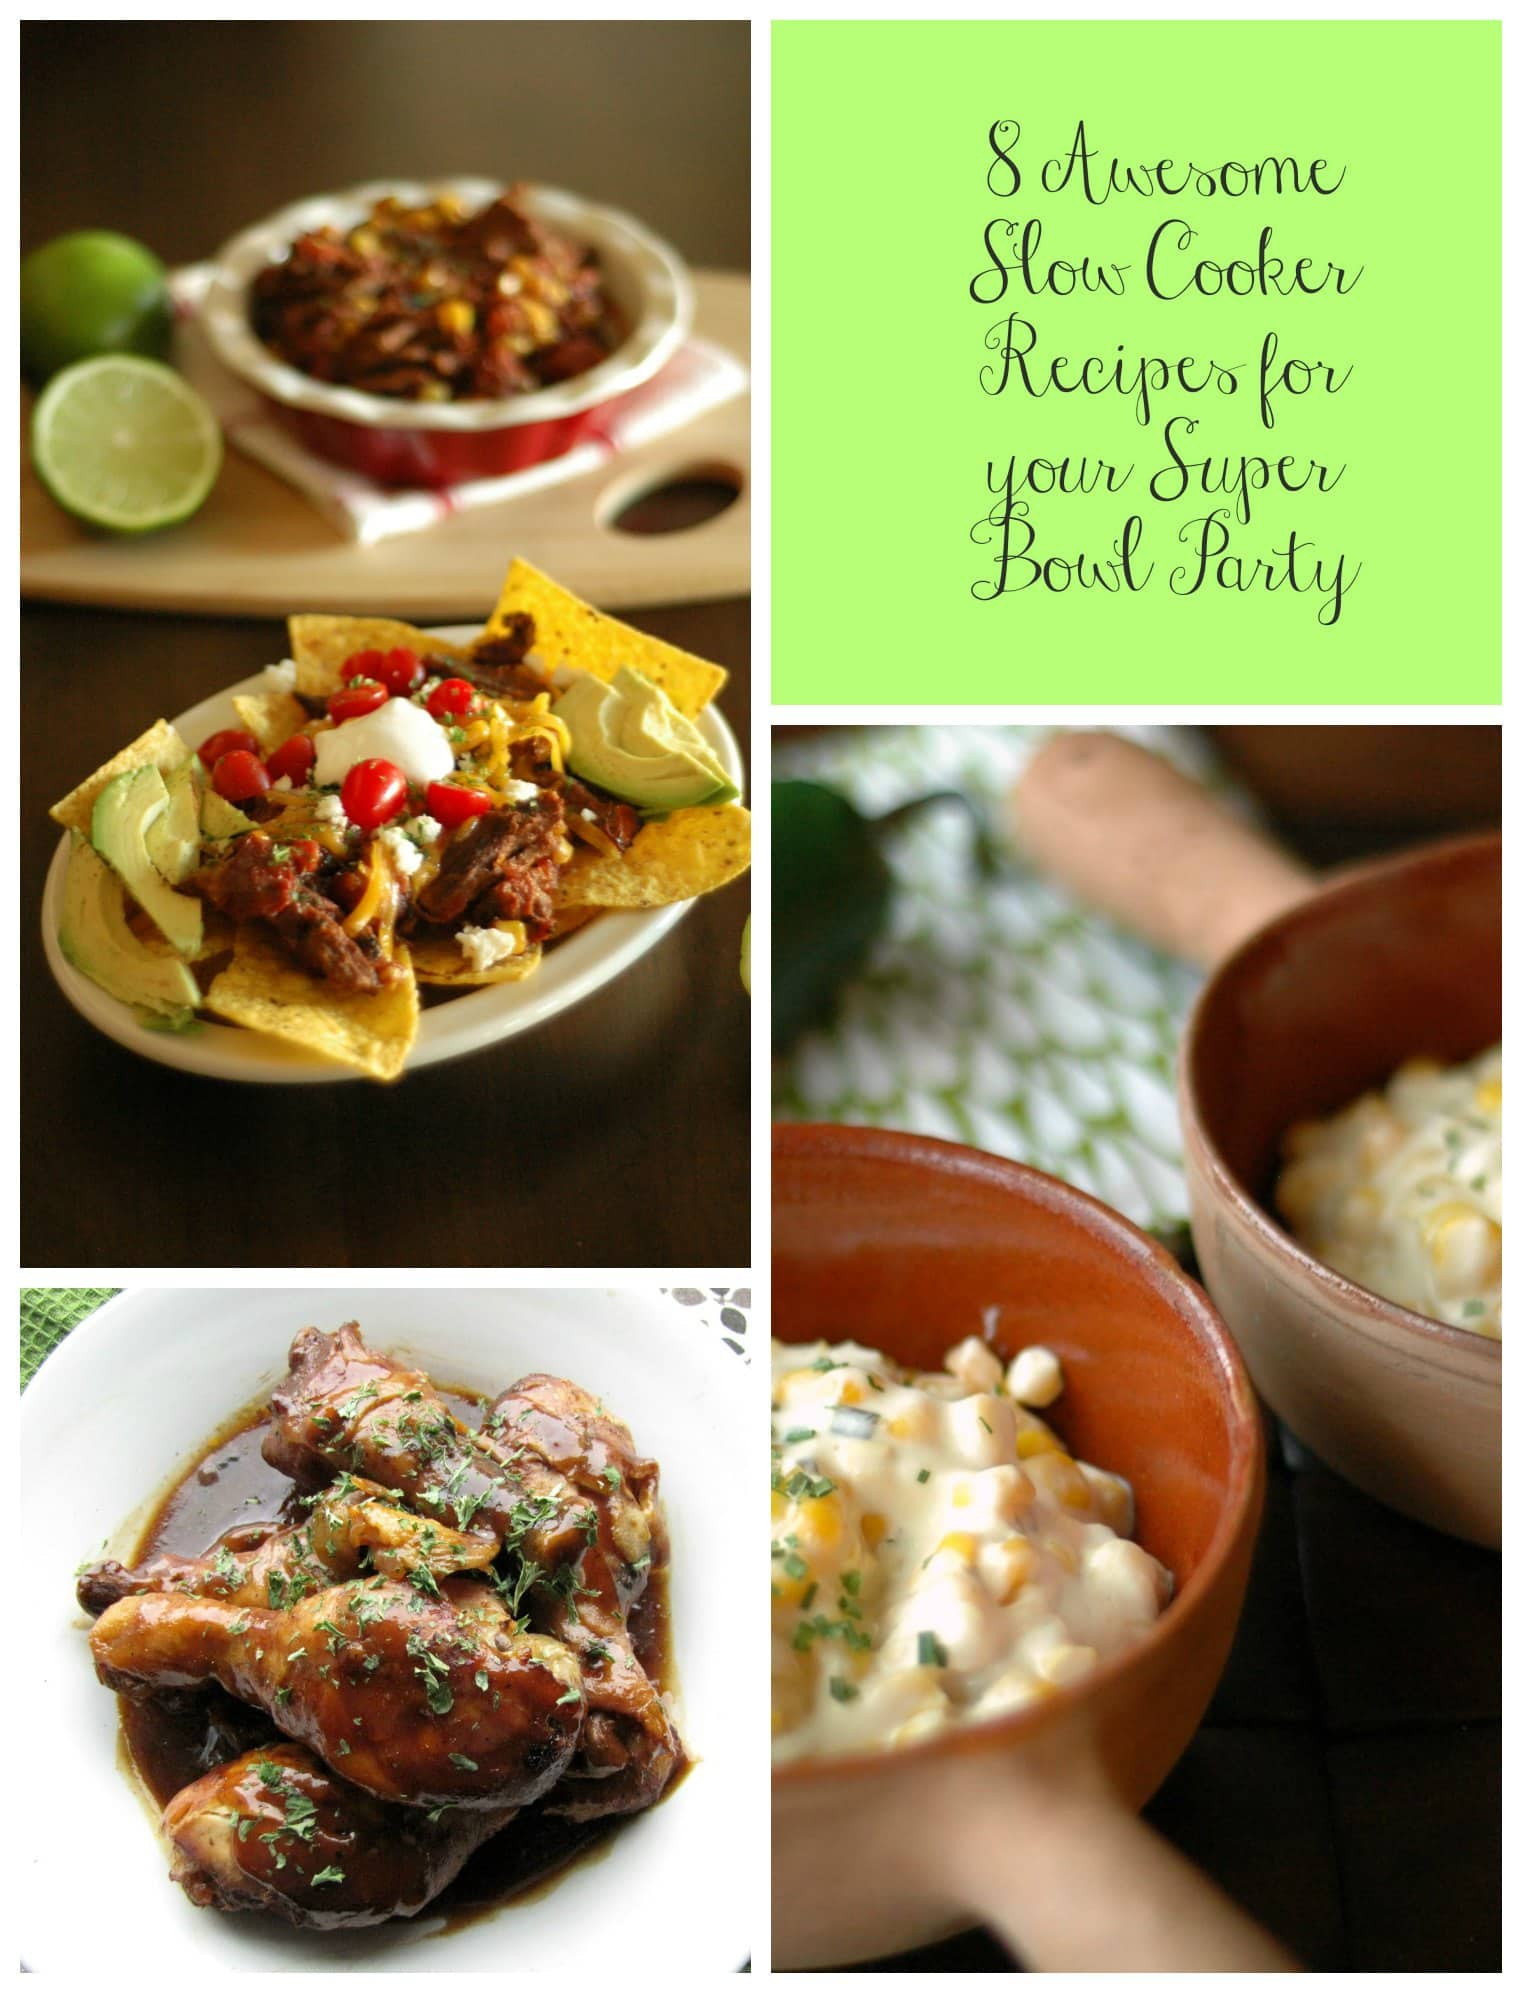 Super Bowl Crockpot Recipes
 8 Awesome Slow Cooker Recipes for your Super Bowl Party